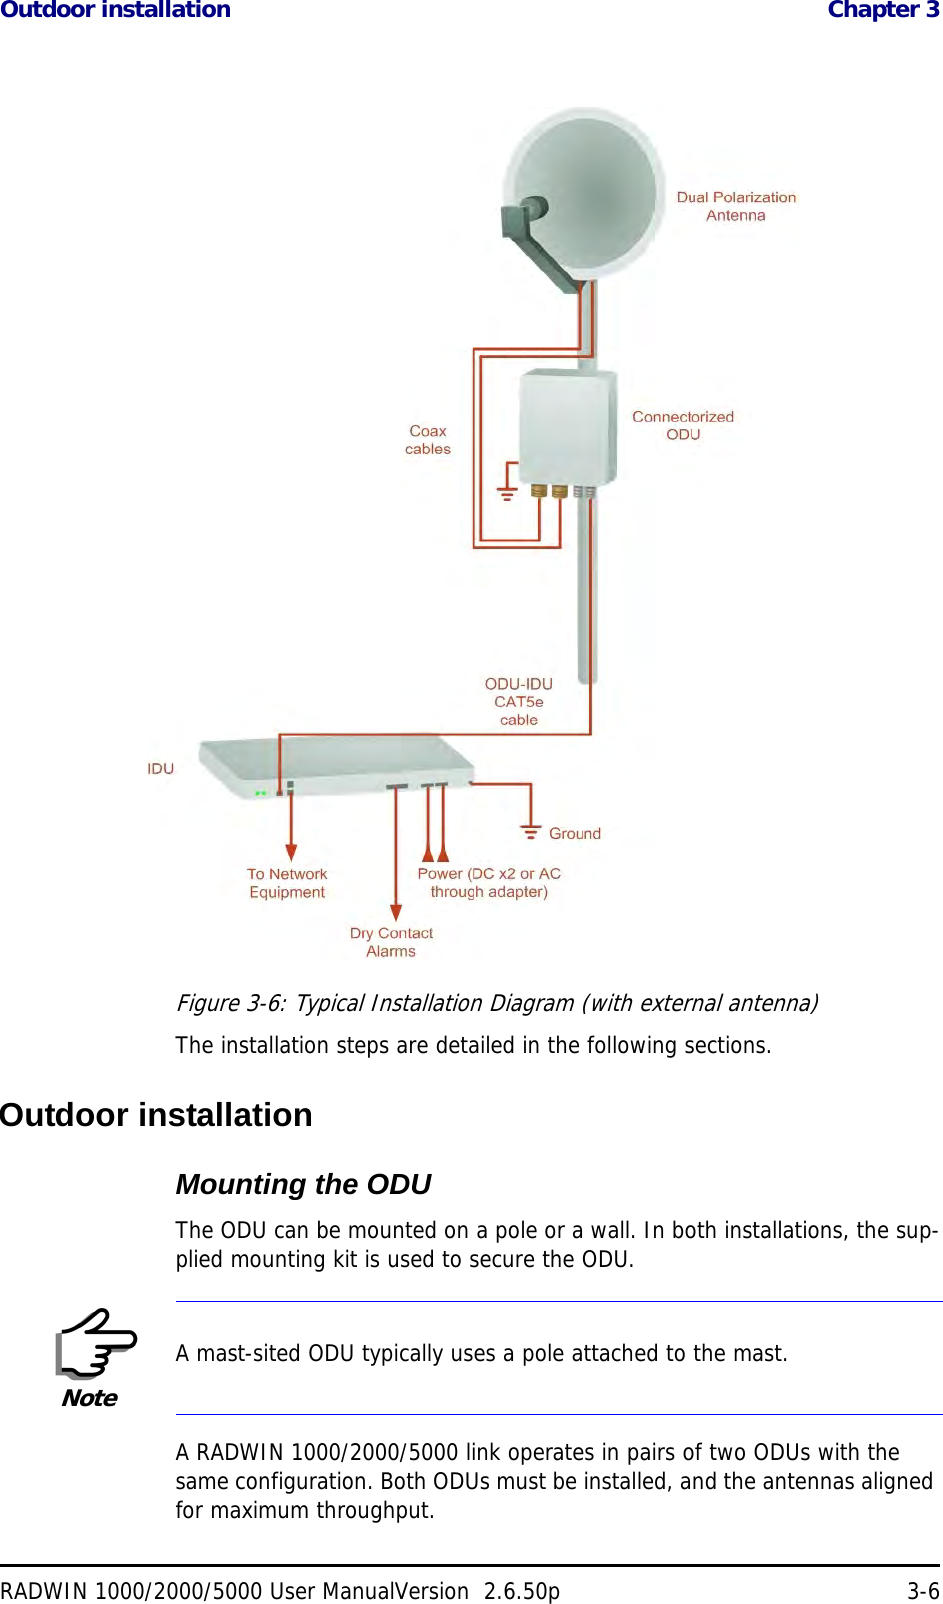 Outdoor installation  Chapter 3RADWIN 1000/2000/5000 User ManualVersion  2.6.50p 3-6Figure 3-6: Typical Installation Diagram (with external antenna)The installation steps are detailed in the following sections.Outdoor installationMounting the ODUThe ODU can be mounted on a pole or a wall. In both installations, the sup-plied mounting kit is used to secure the ODU.A RADWIN 1000/2000/5000 link operates in pairs of two ODUs with the same configuration. Both ODUs must be installed, and the antennas aligned for maximum throughput.NoteA mast-sited ODU typically uses a pole attached to the mast.